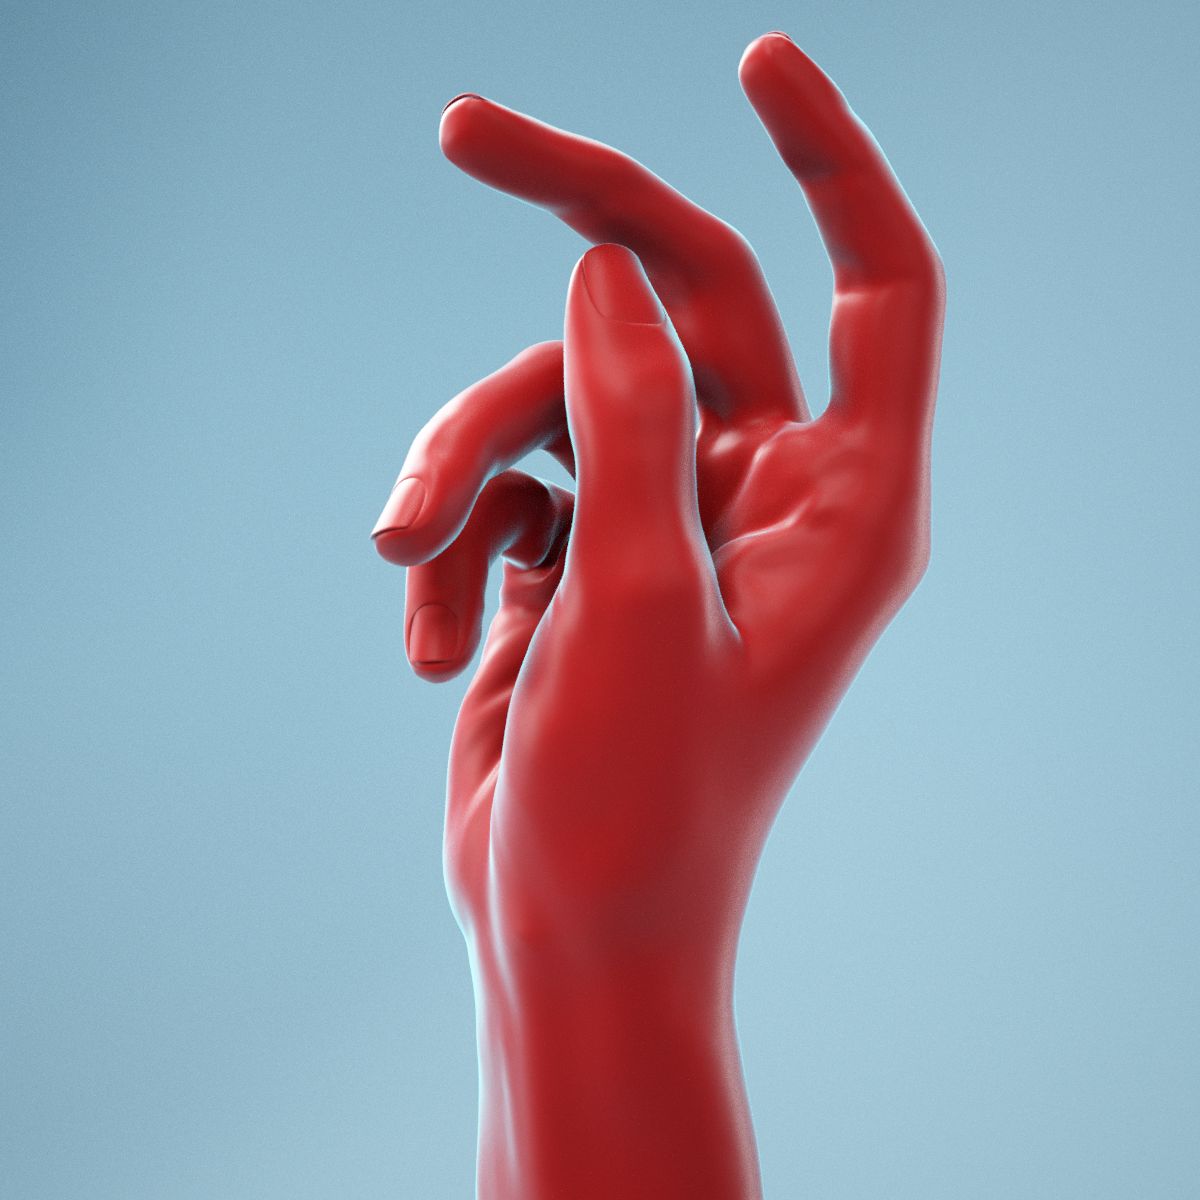 Relaxed Grip Realistic Hand